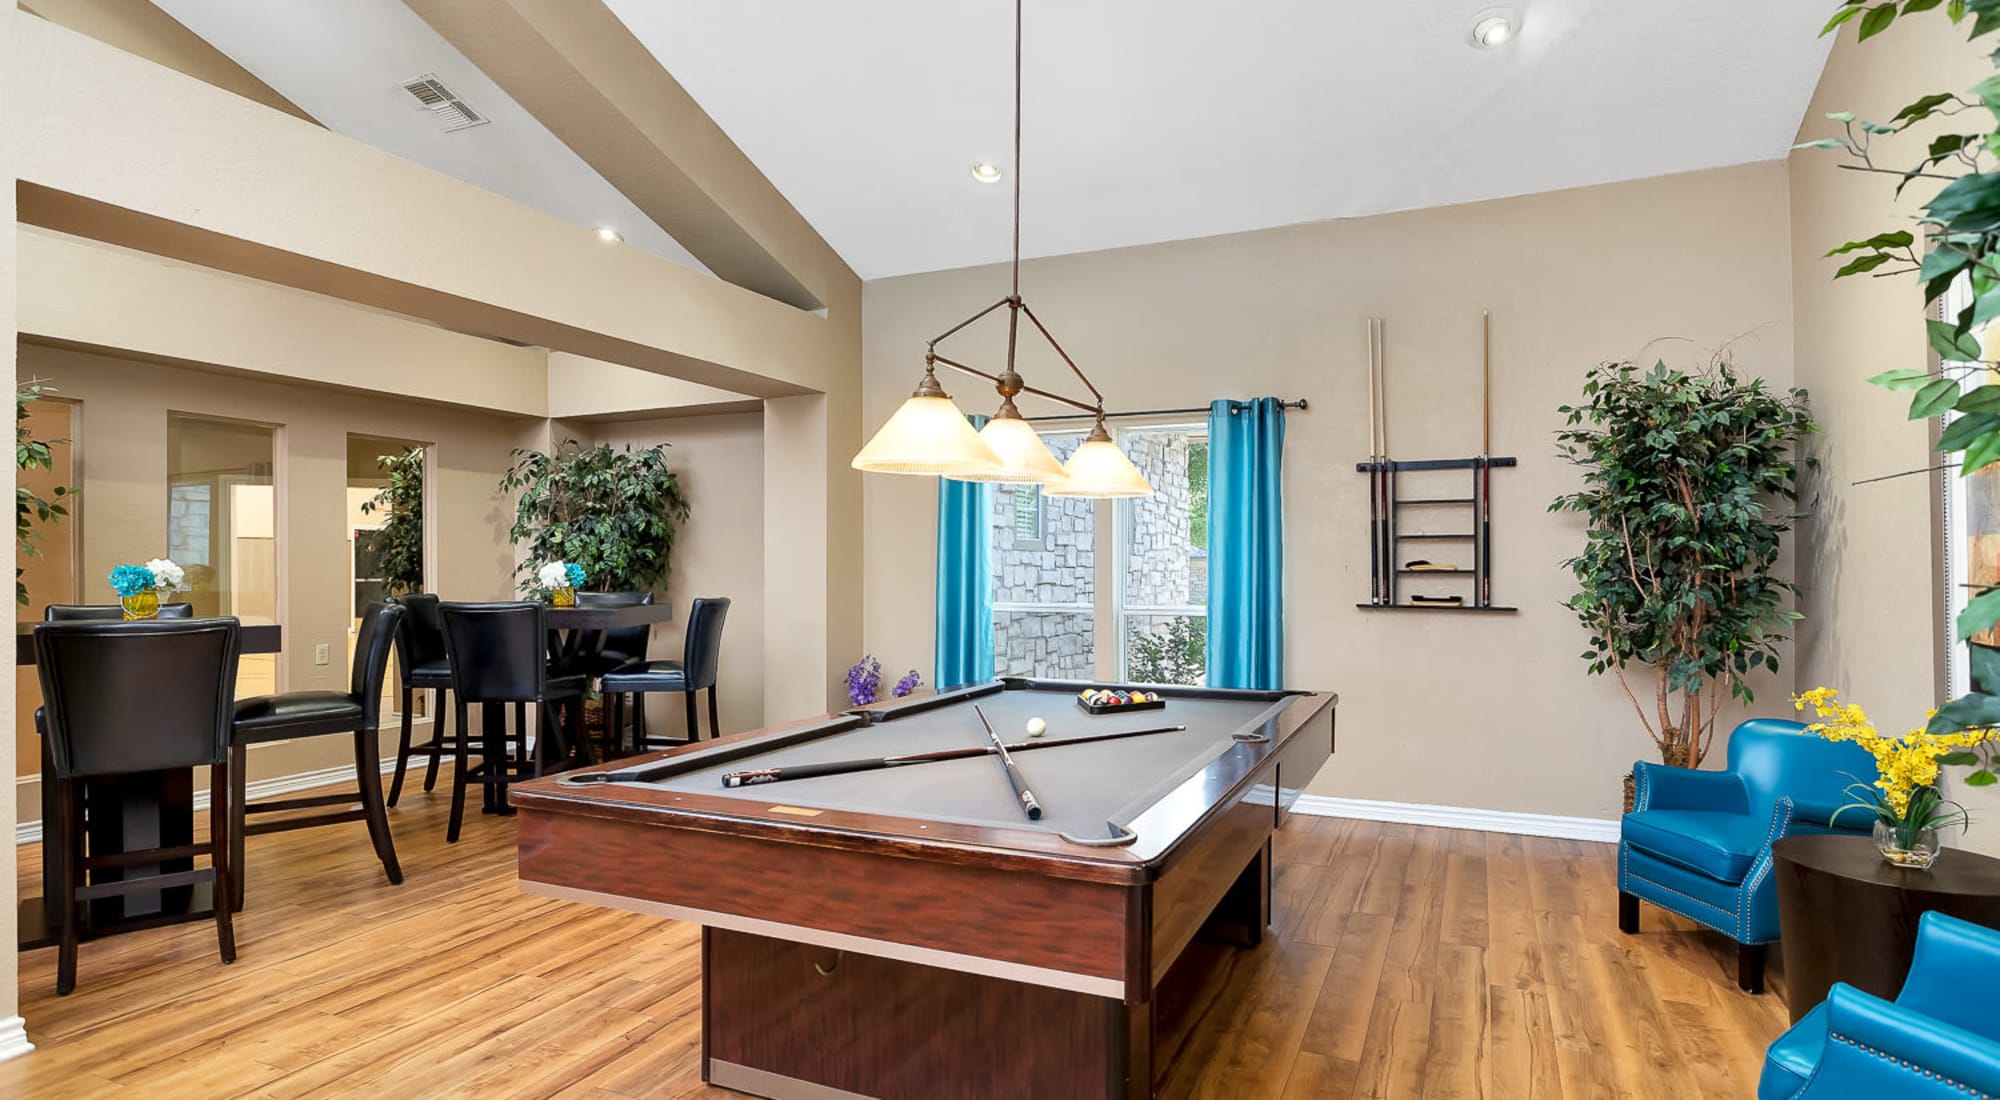 Game room with Pool Table at Villas at Oakwell Farms